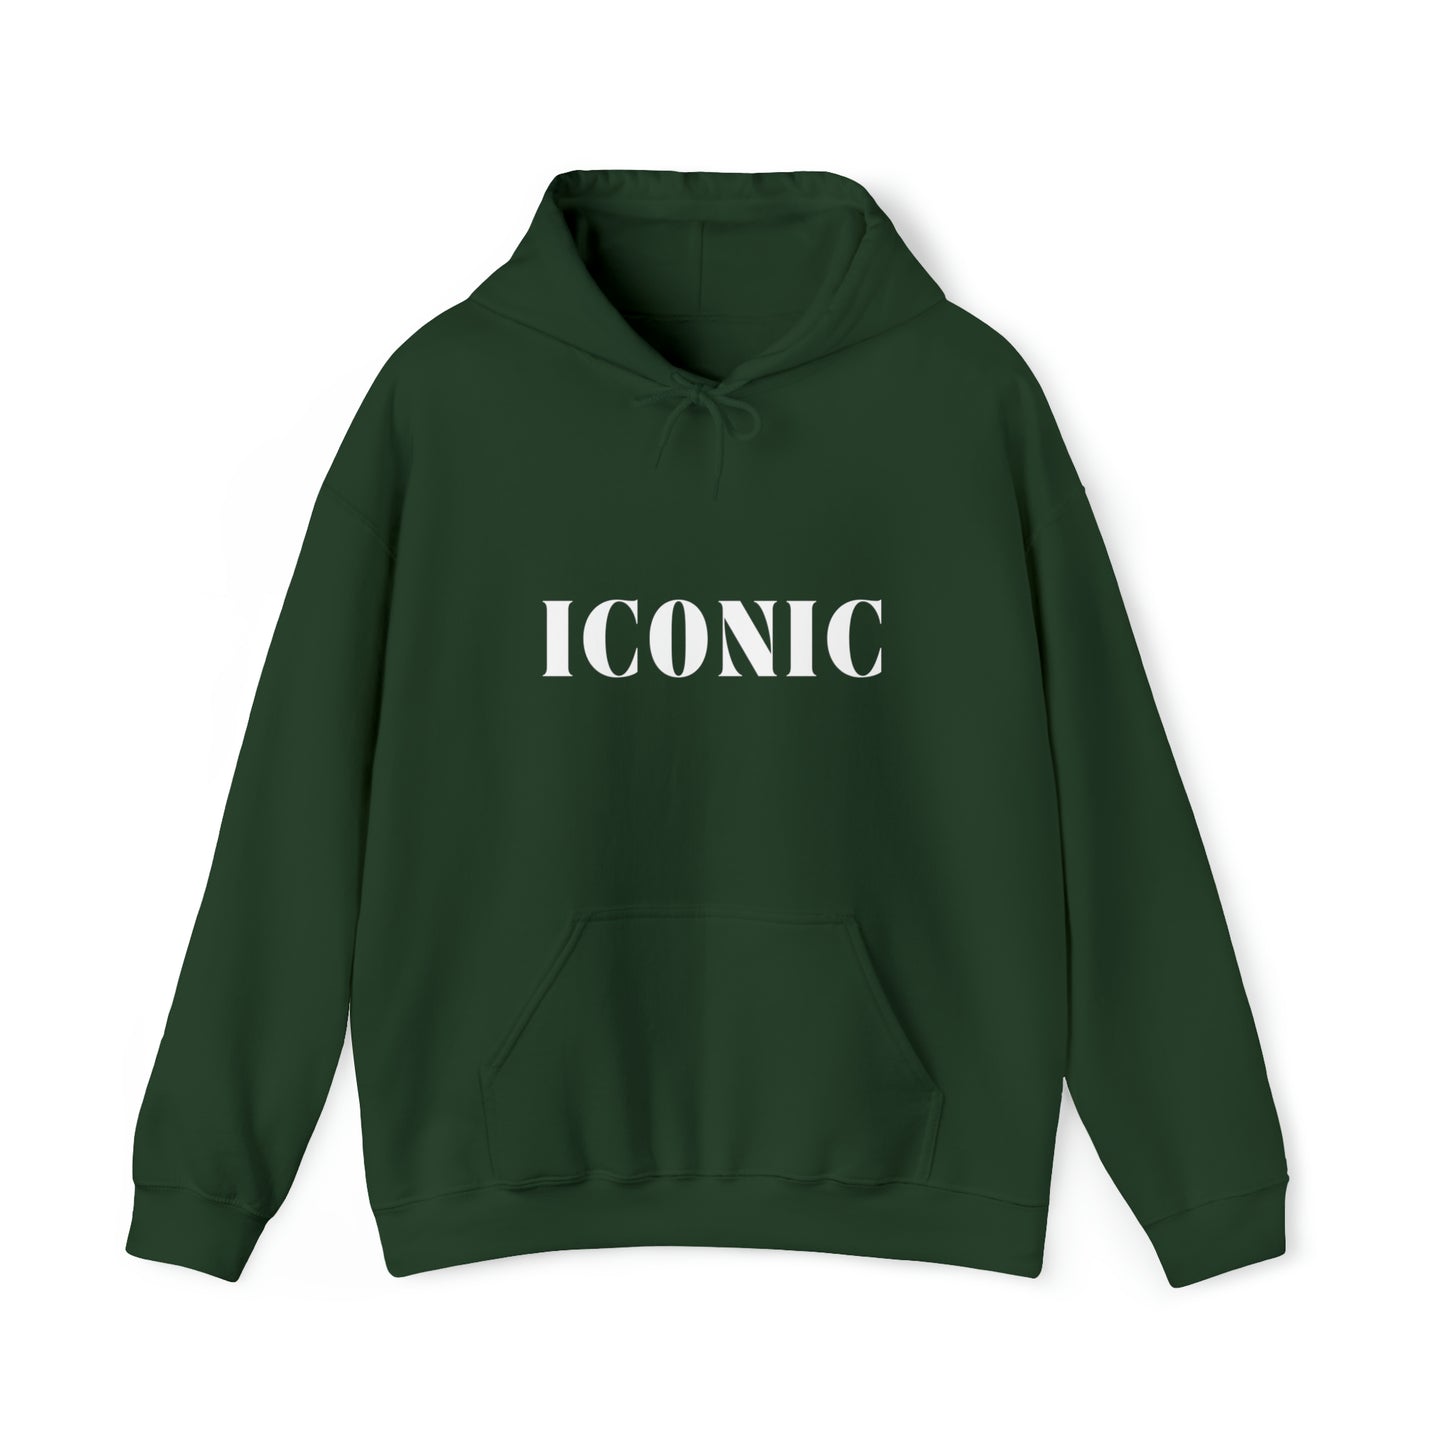 S Forest Green Iconic Hoodie from HoodySZN.com